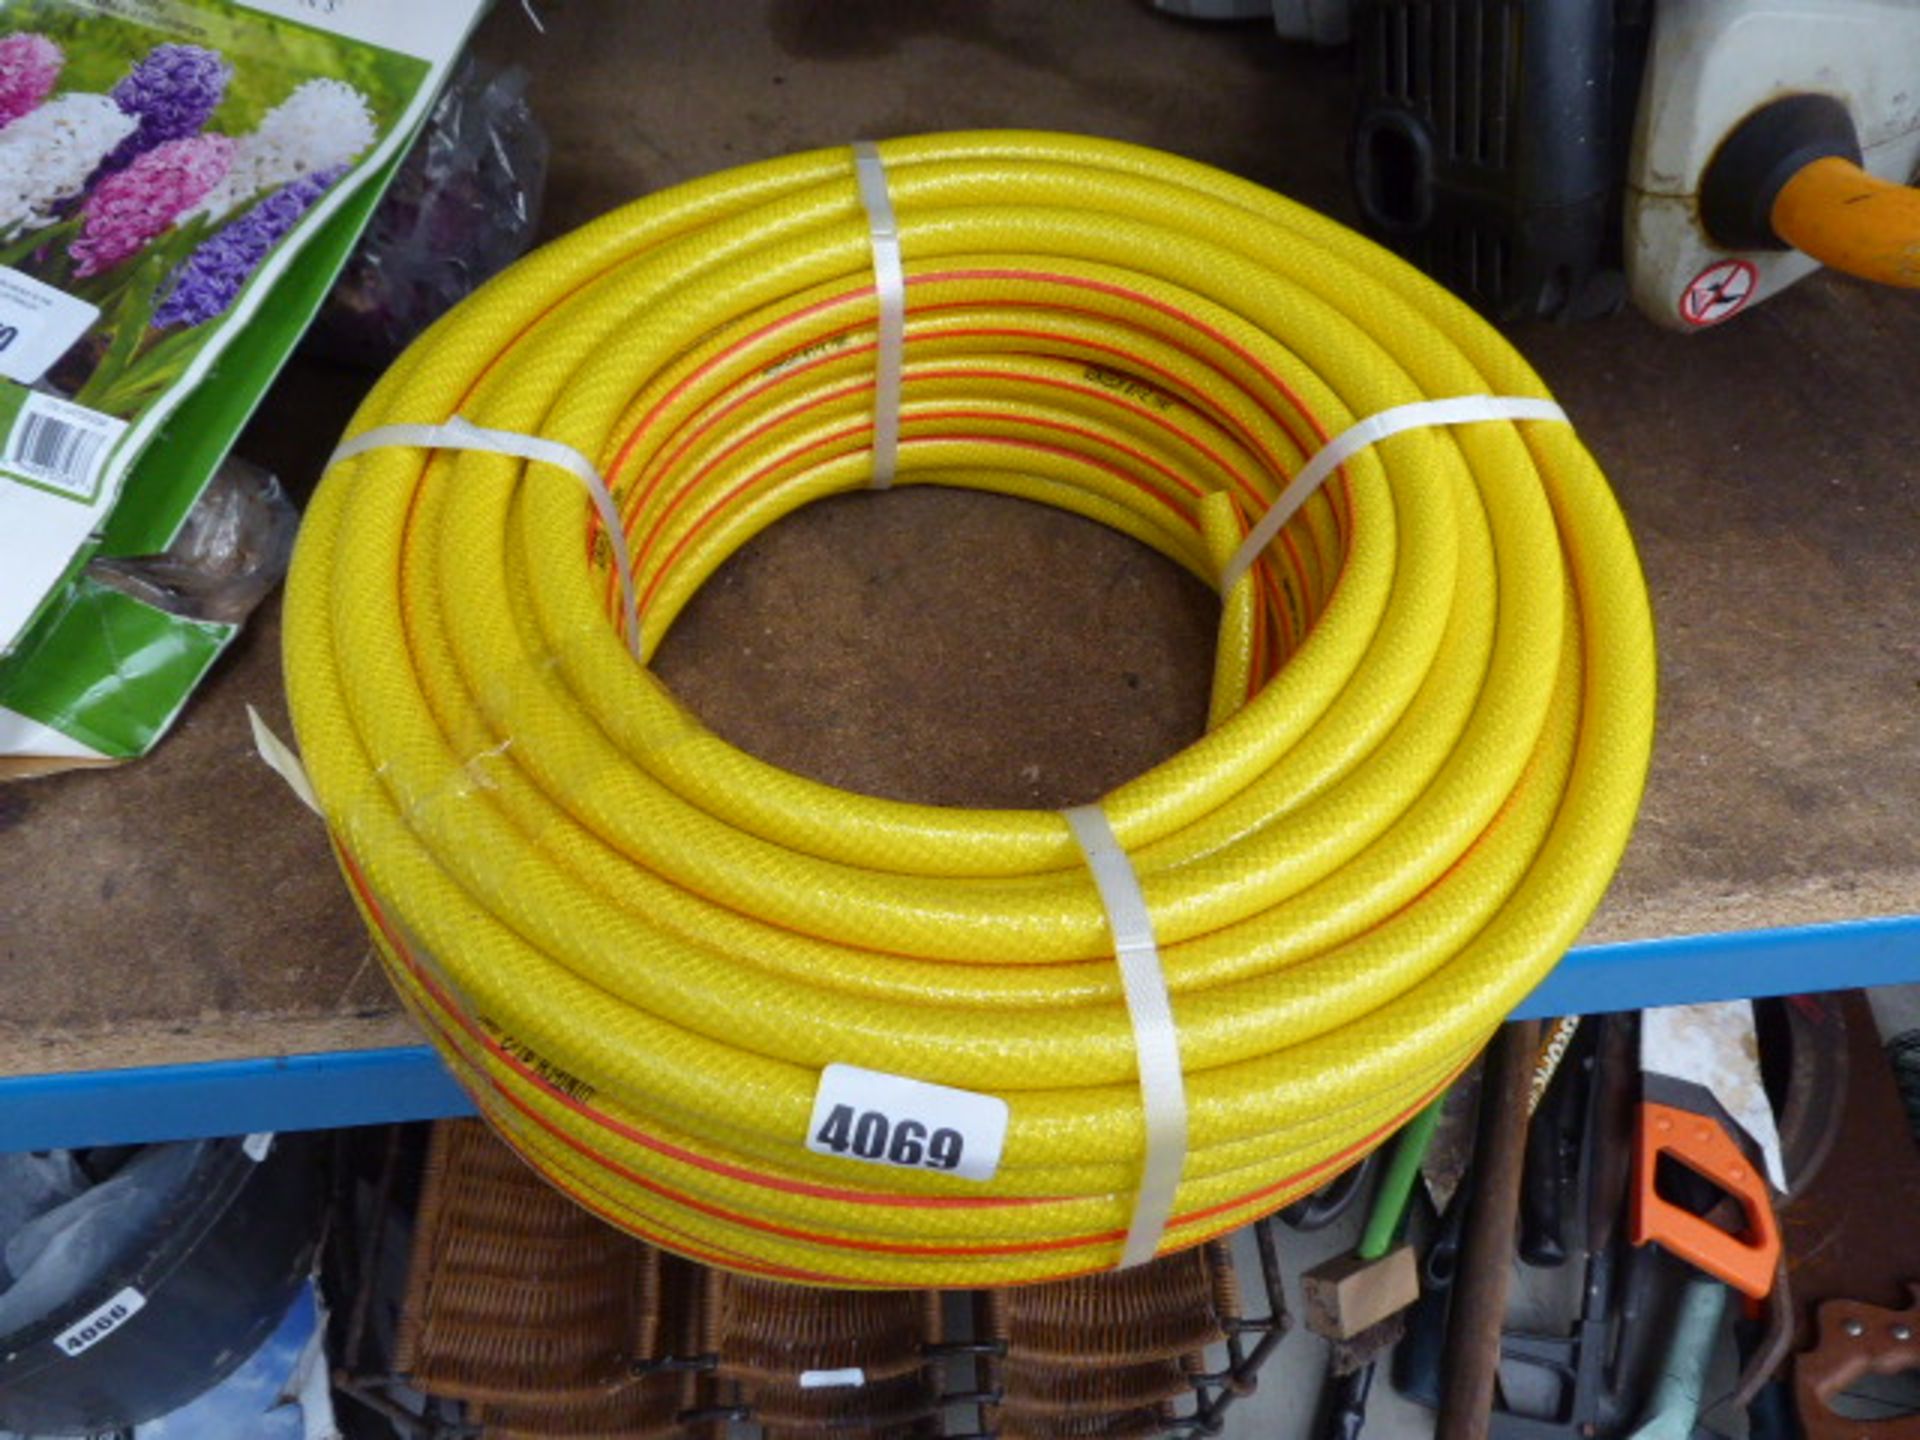 Small roll of yellow hose